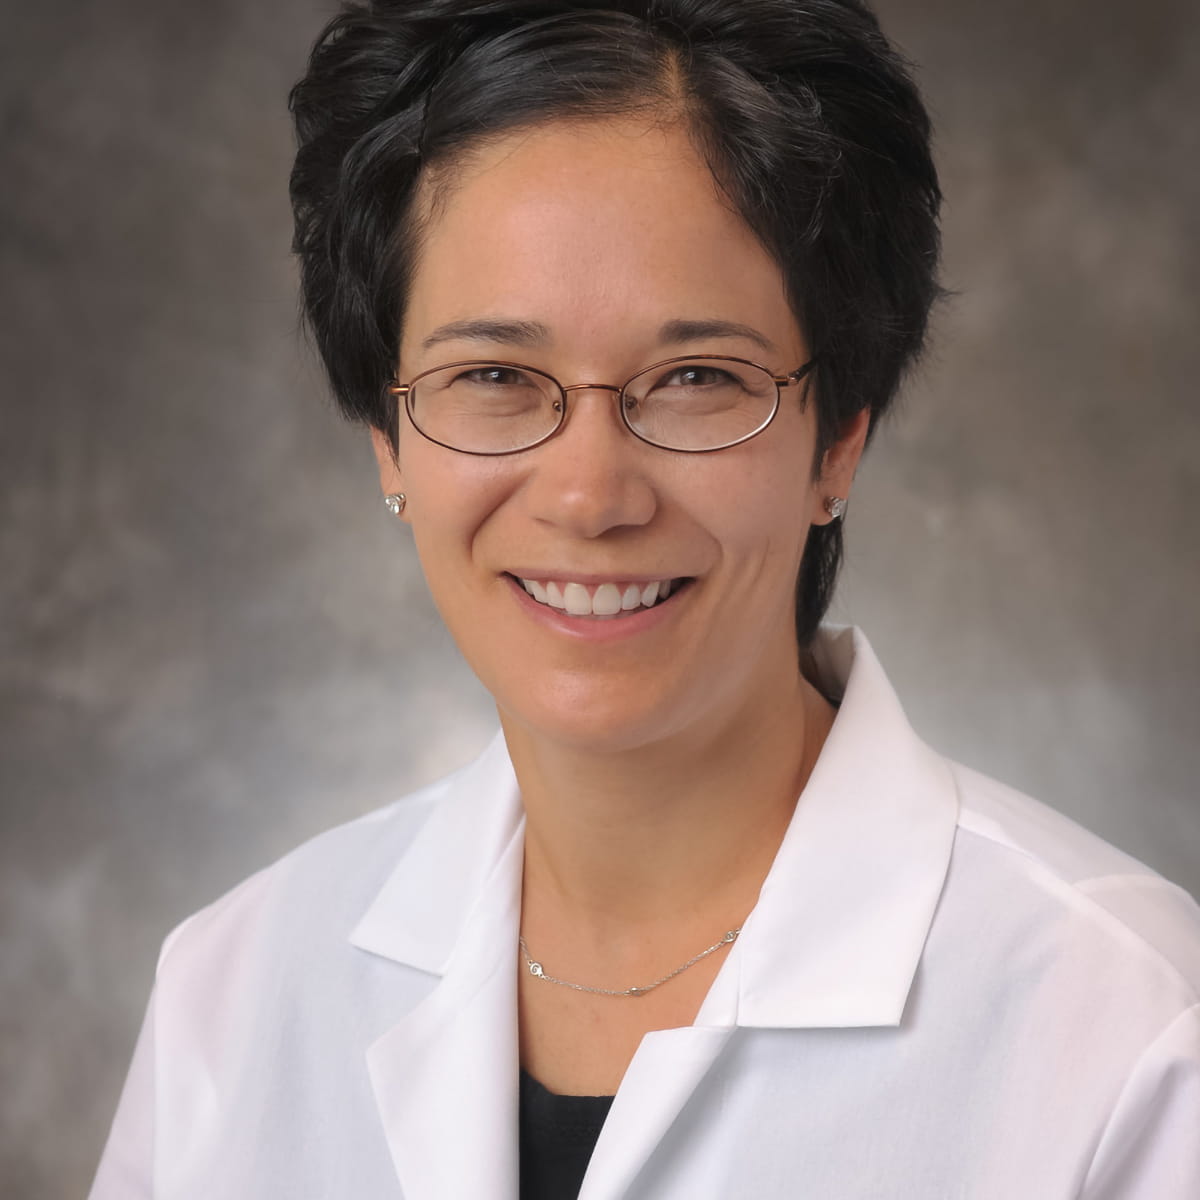 A friendly headshot of Leslie Choy-Hee, MD